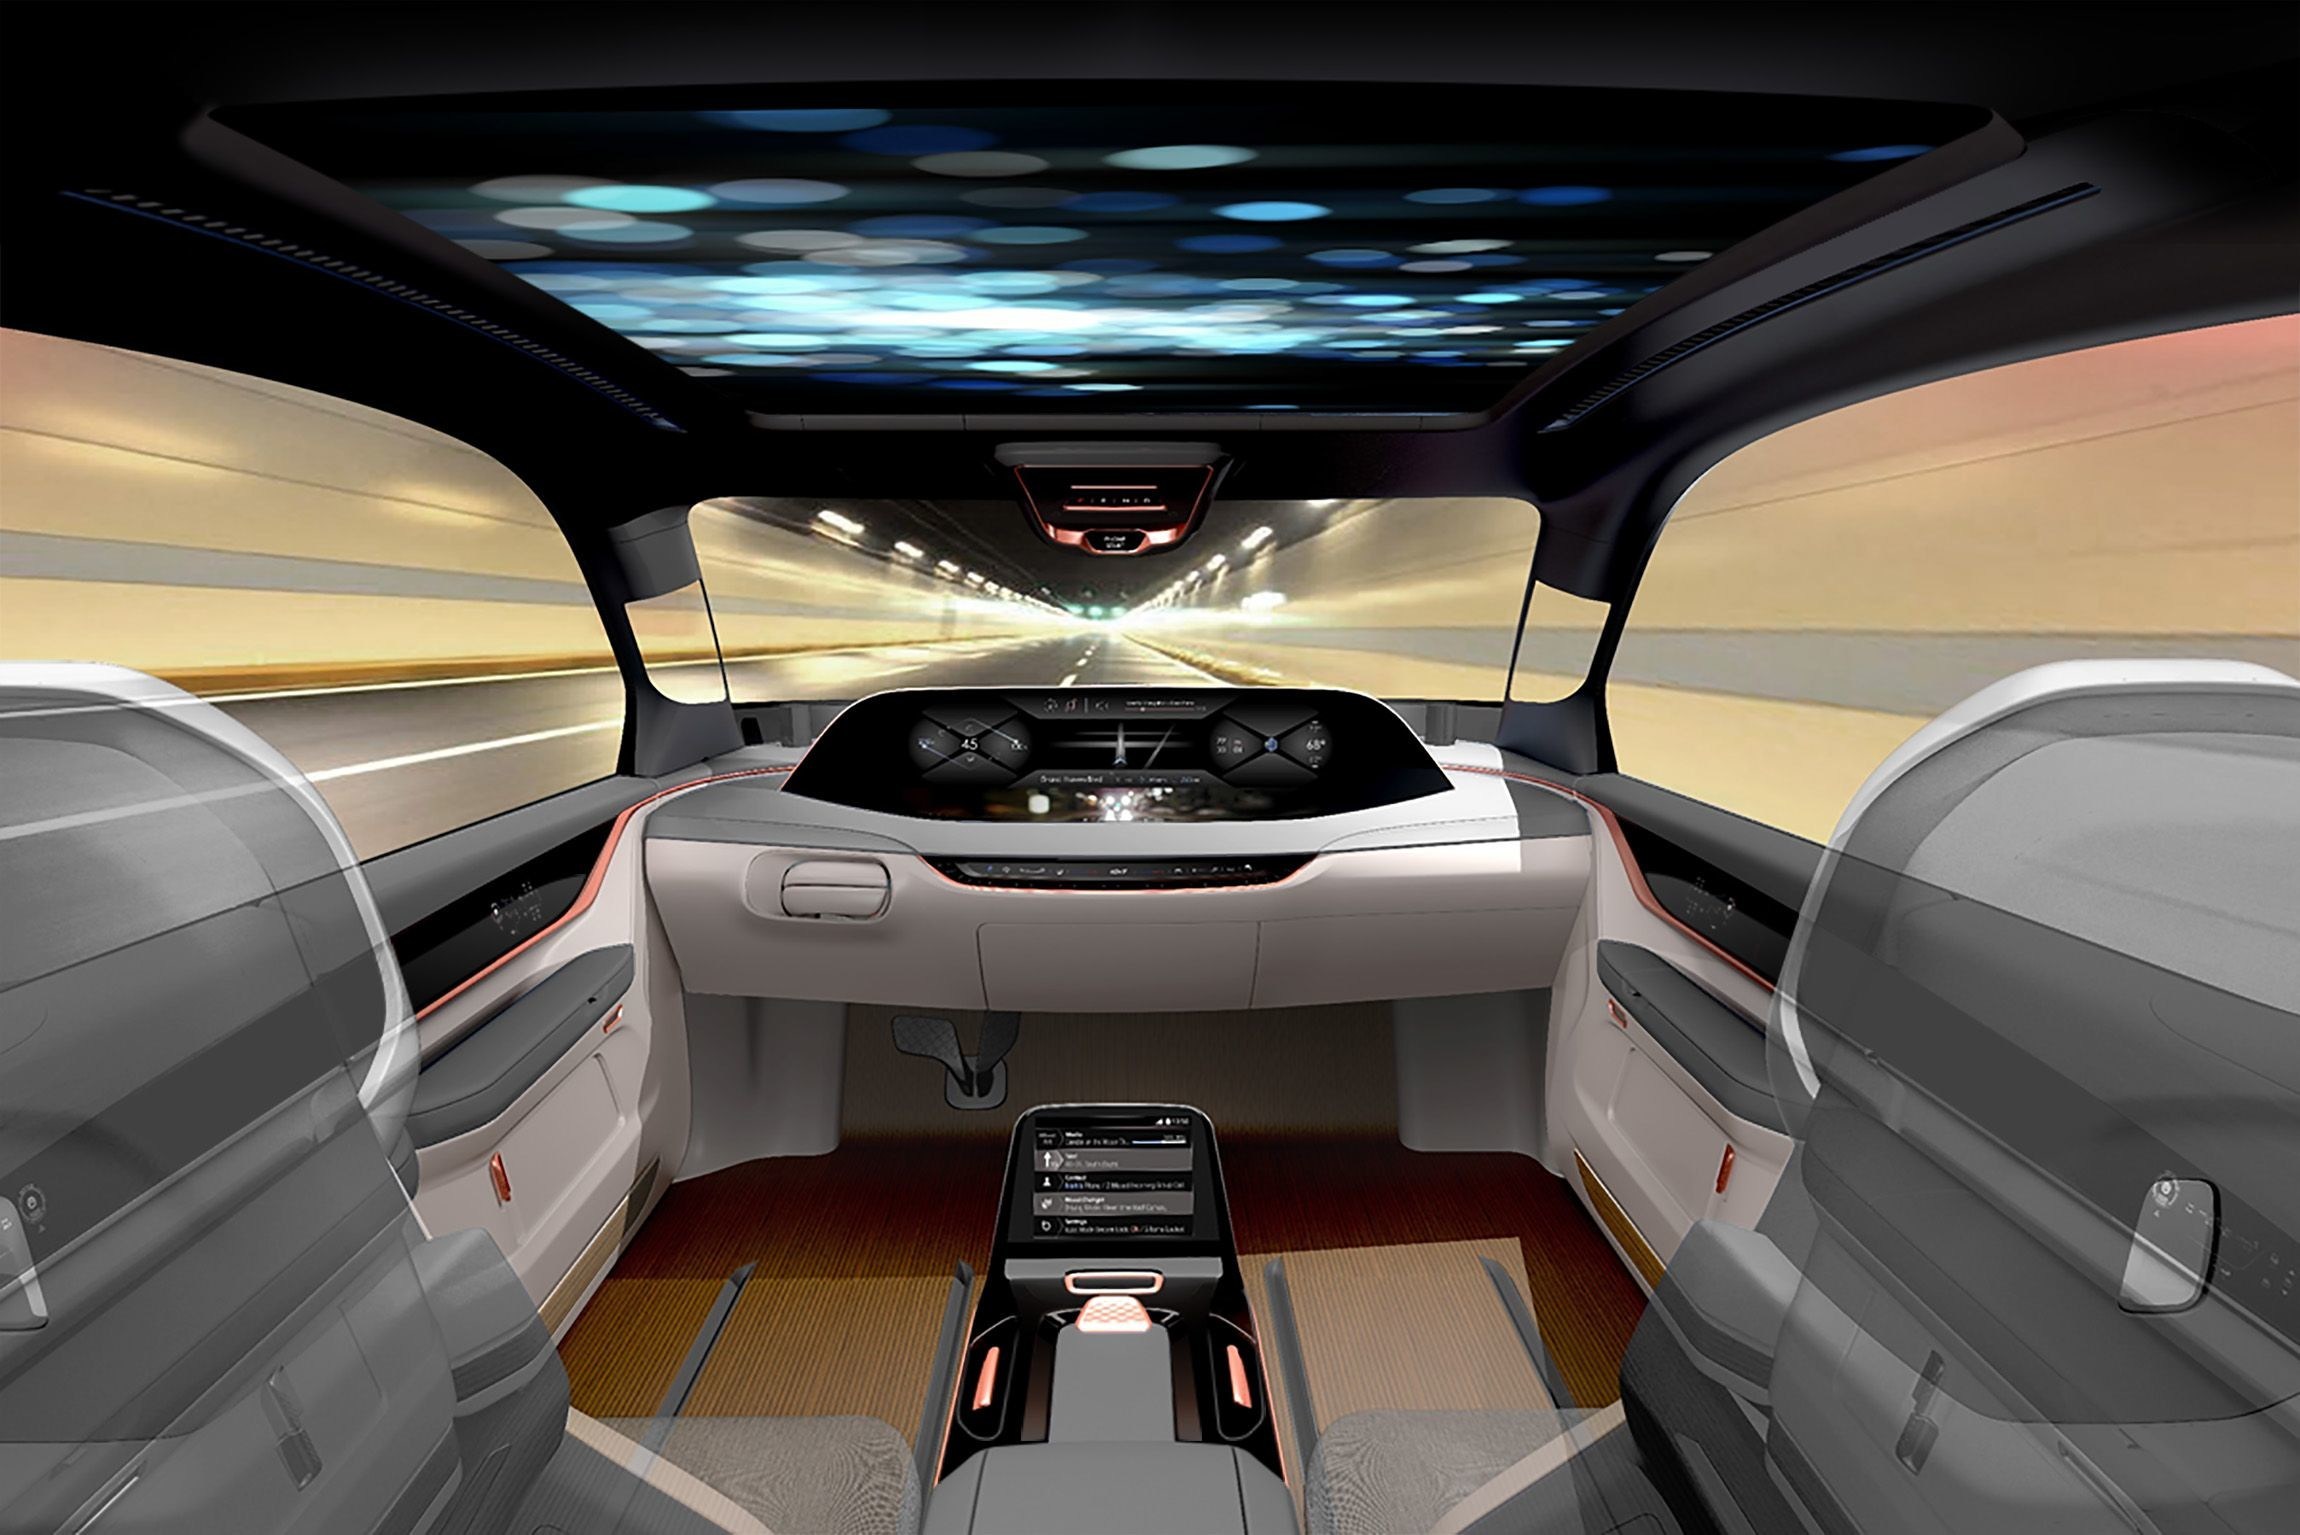 Yanfeng concept for the interior of tomorrow. © PRNewsfoto/Yanfeng Automotive Interiors